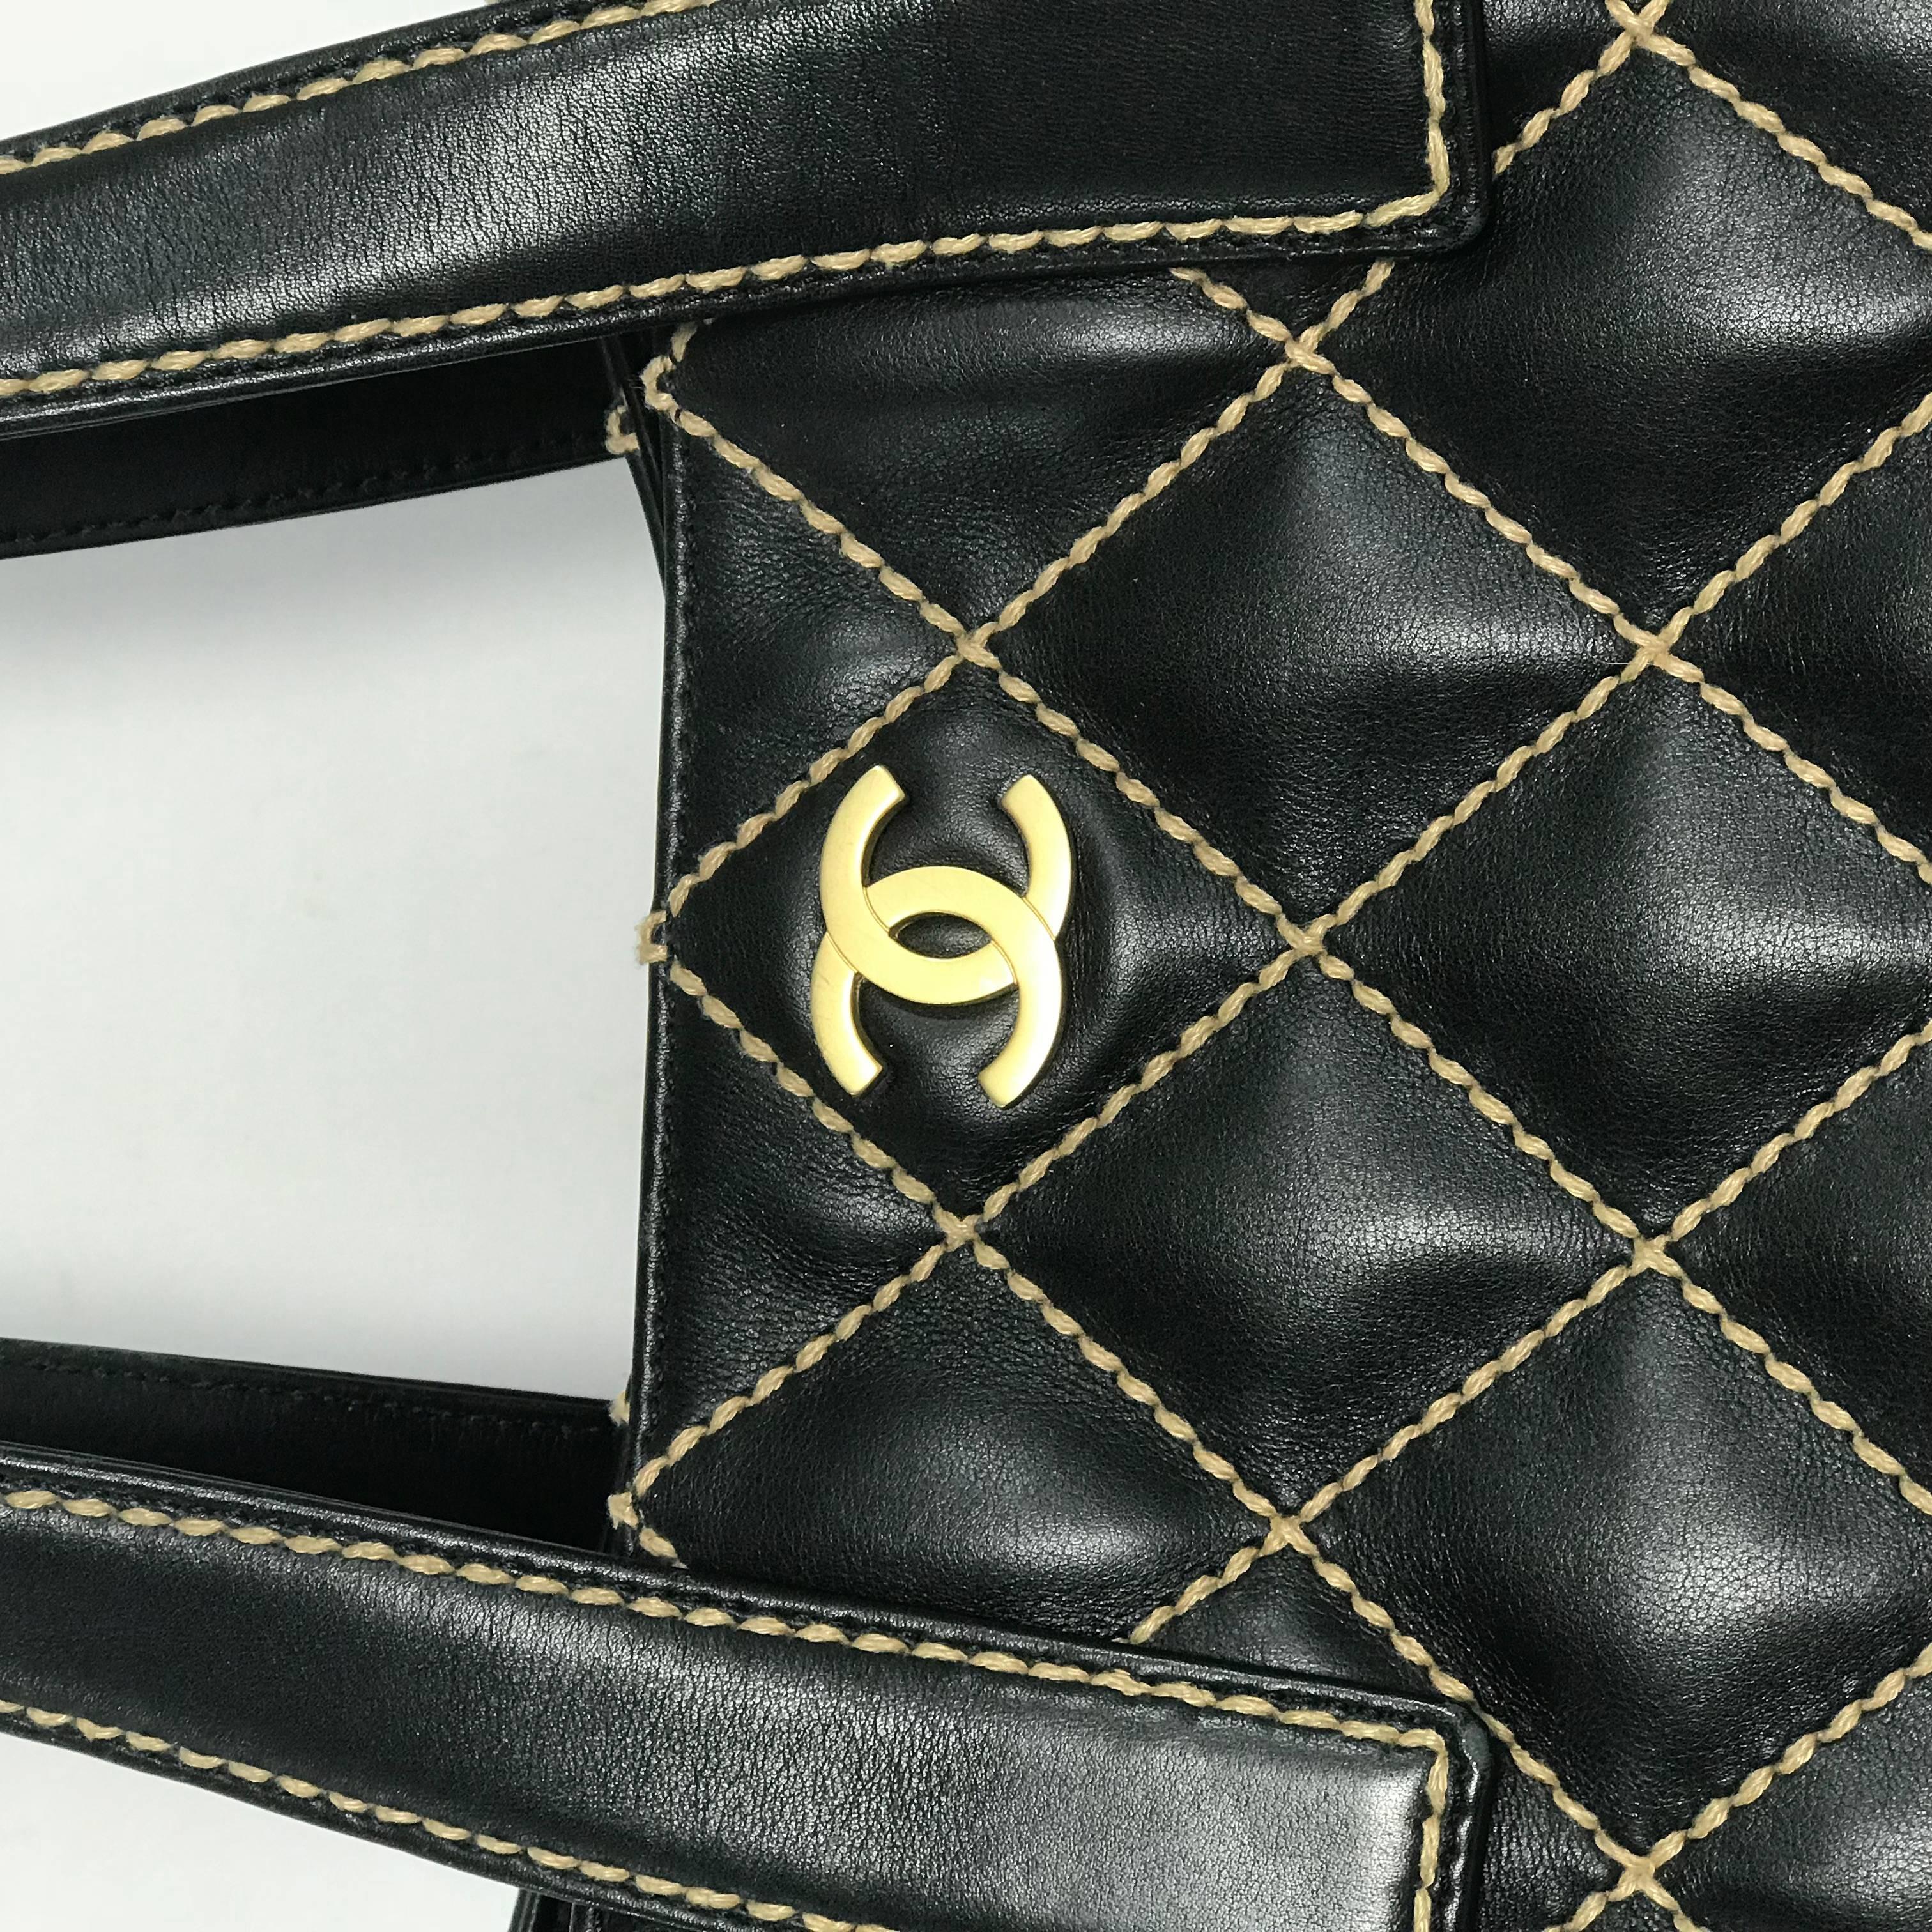 MODEL - Chanel Quilted Leather Wild Stitch Tote in Black

CONDITION - Looks almost New! No visible signs of wear.

SKU - 1894

ORIGINAL RETAIL PRICE - 3250

DATE/SERIAL CODE - 2069810

ORIGIN - France

PRODUCTION - 1991 to 1994

DIMENSIONS - L16 x